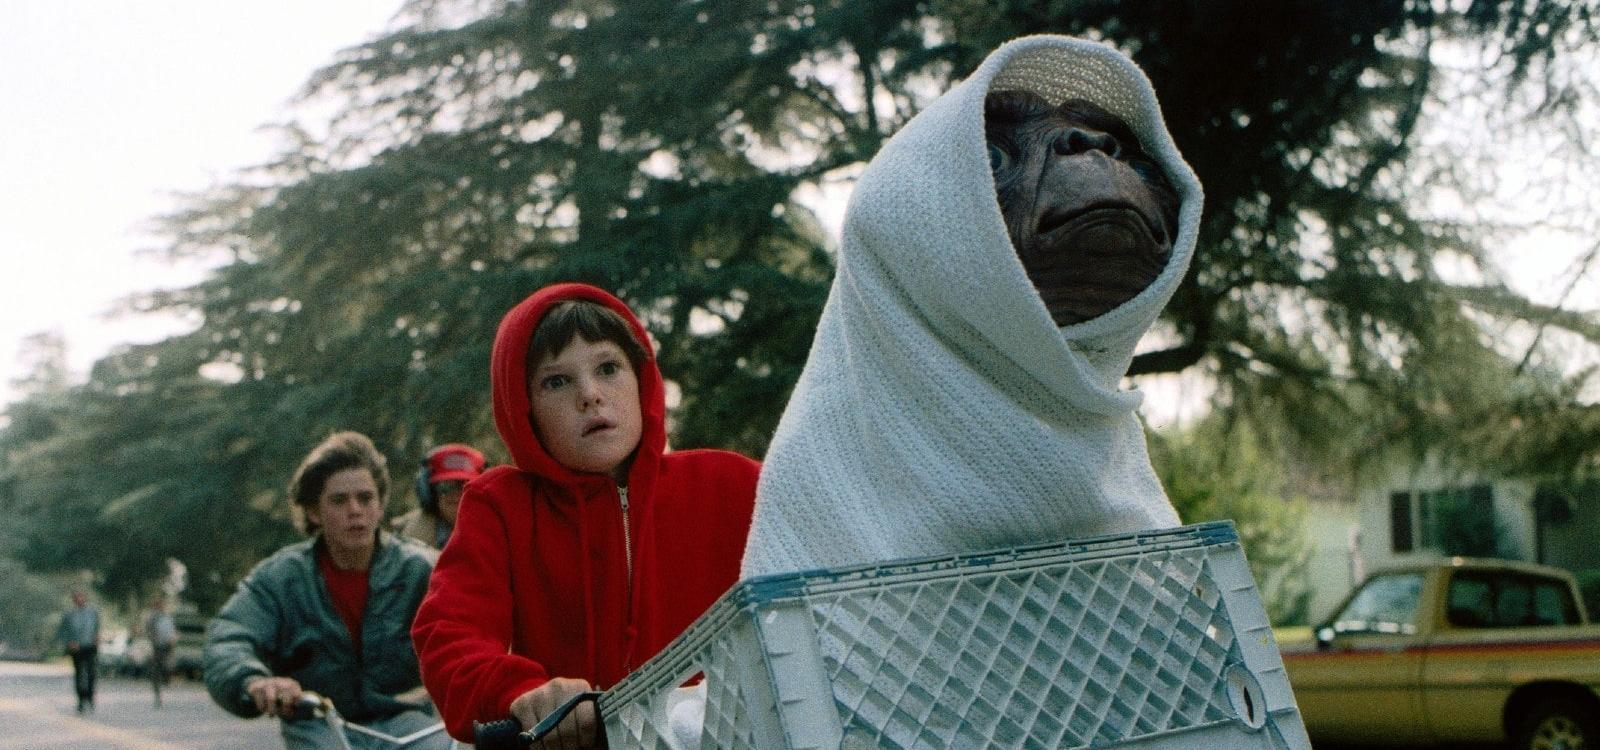 Elliott rides his bike with E.T. covered in a blanket in a bicycle basket - 80s movies